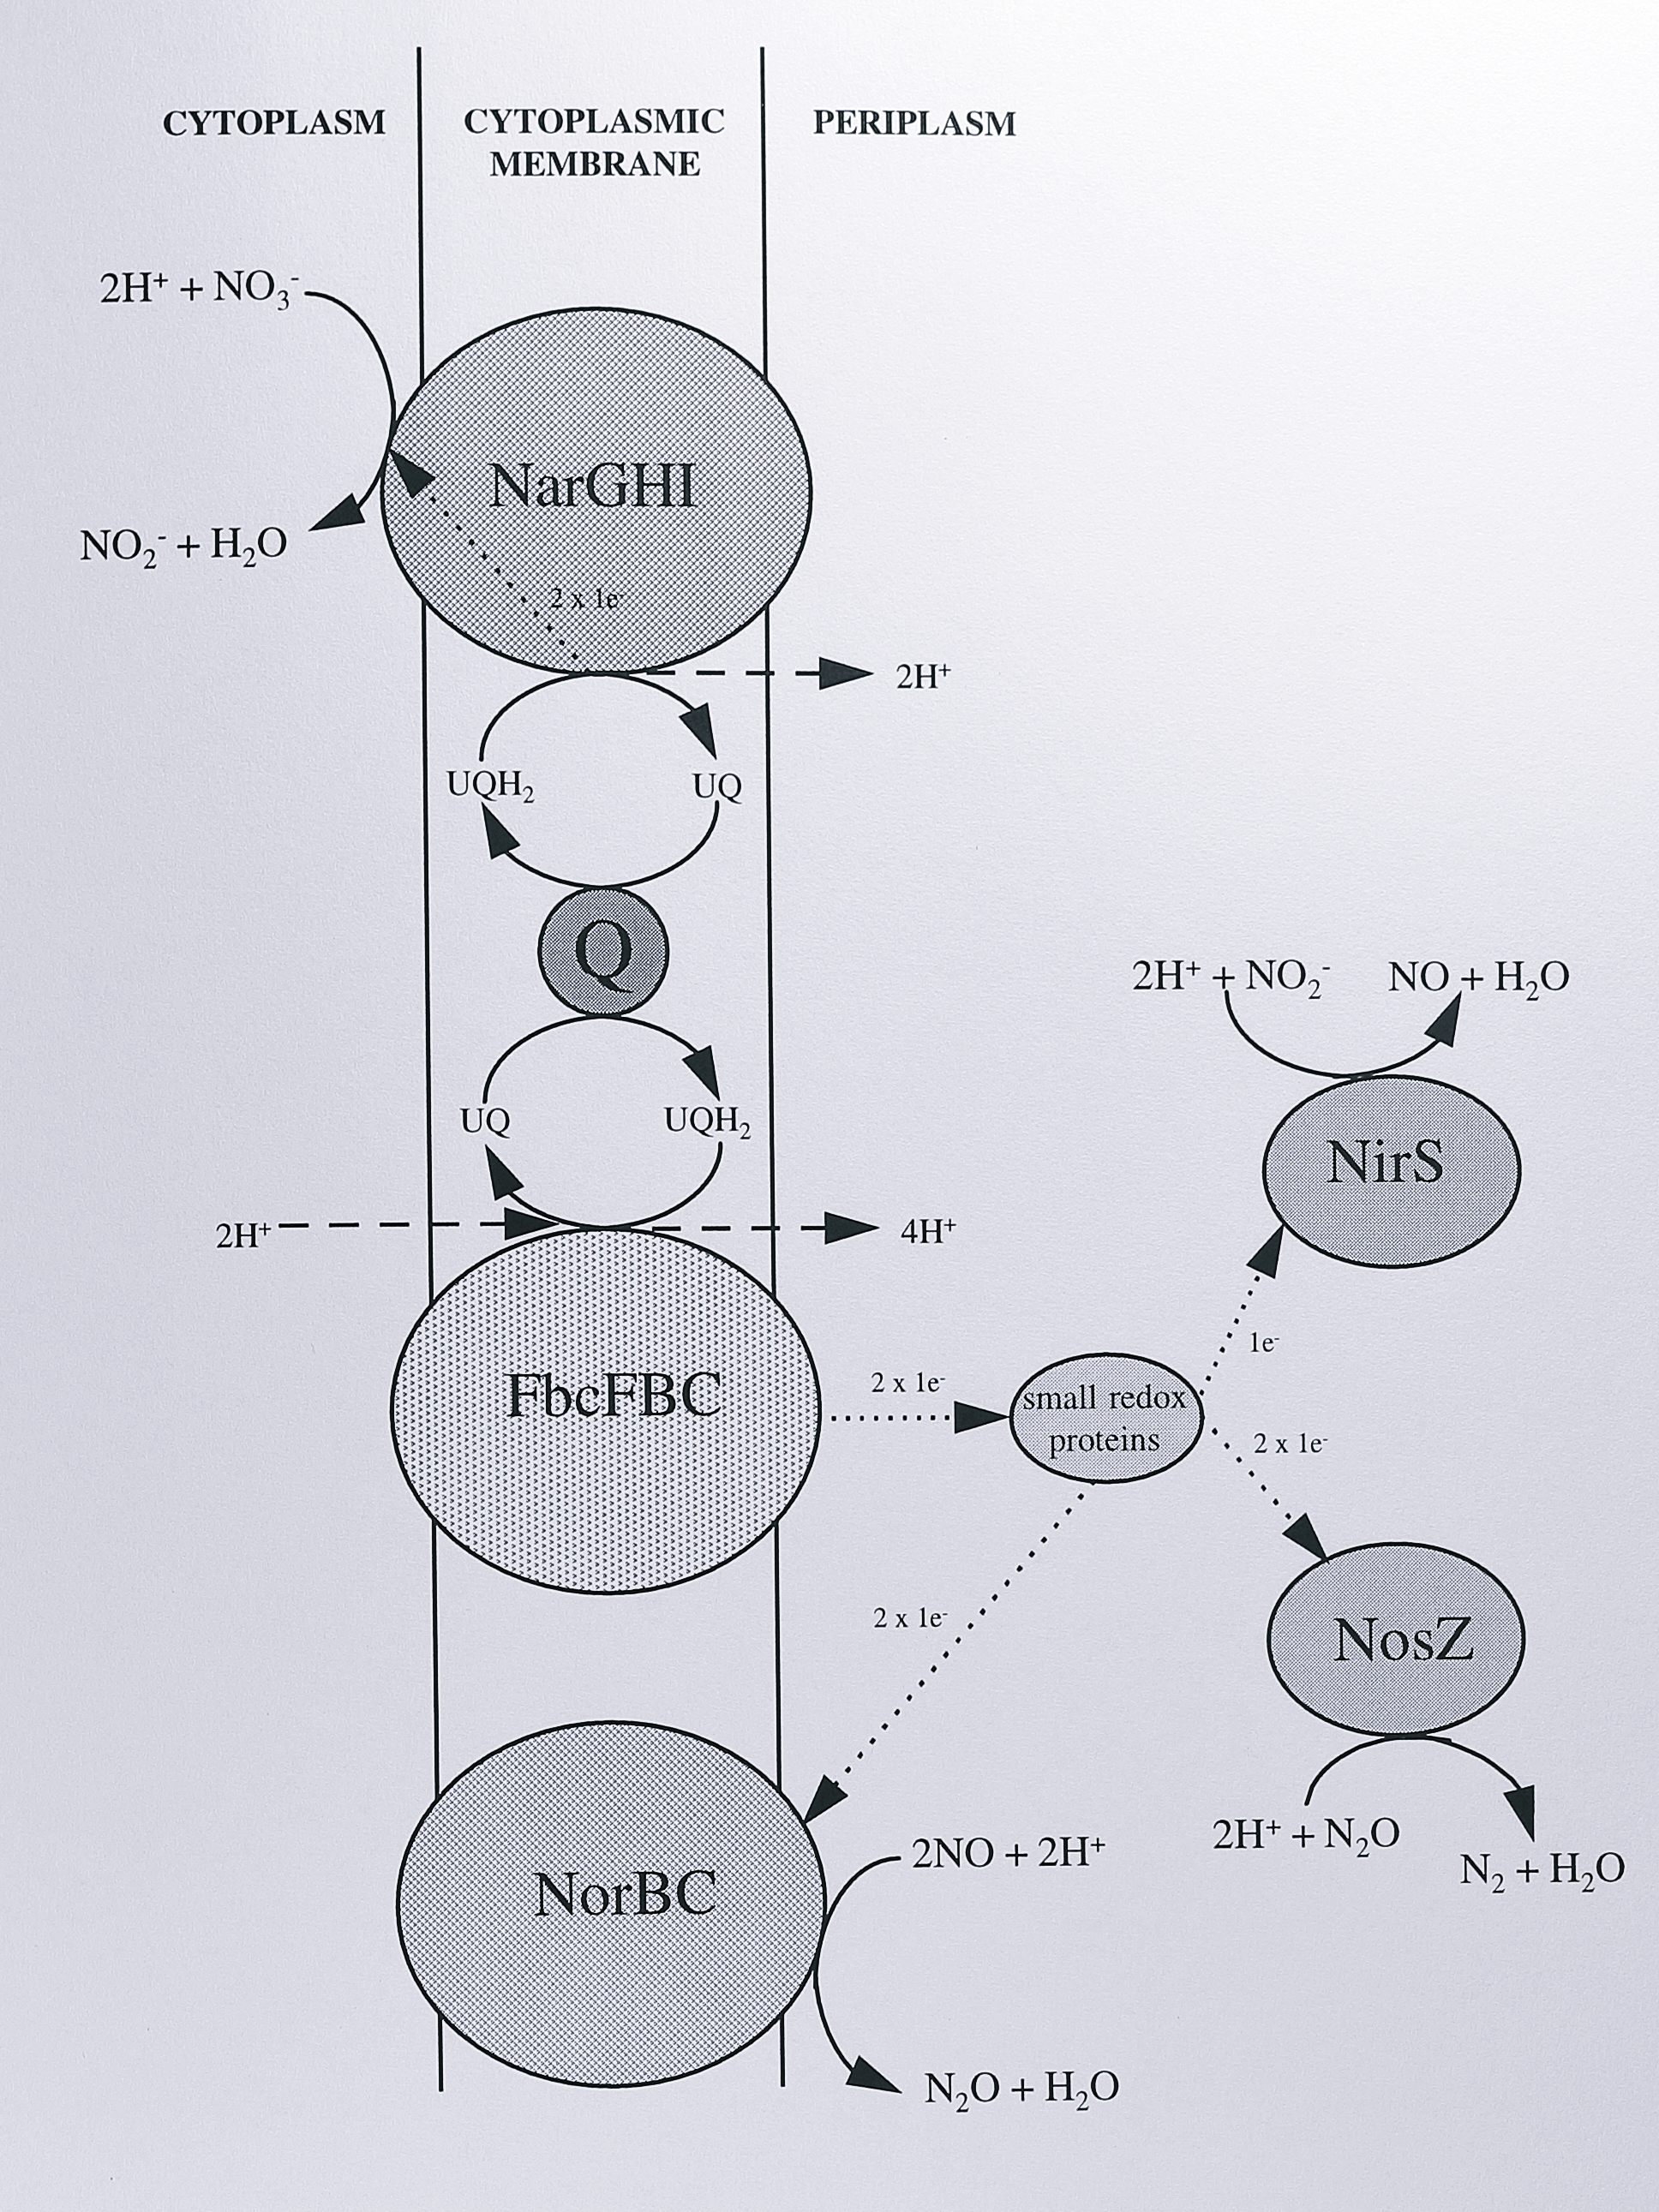 The denitrifying electron transport chain of _Paracoccus denitrificans_. The enzymes shown are: NarGHI, nitrate reductase, FbcFBC, cytochrome _bc_$_1$ complex, NorBC, nitric oxide reductase, NirS, cyochrome _cd_$_1$ nitrite reductase, NosZ, nitrous oxide reductase. 'Q' represents the ubiquinol/ubiquinone pool. Chemical reactions are indicated by solid arrows, proton translocation by dashed arrows and electron transfer by dotted arrows, with the stoichiometry shown in each case. Proton translocation at the cytochrome _bc_$_1$ complex is described by the proton-motive Q-cycle (see text for details). Not shown is the periplasmic nitrate reductase, which is not present during anaerobic denitrifying growth conditions.